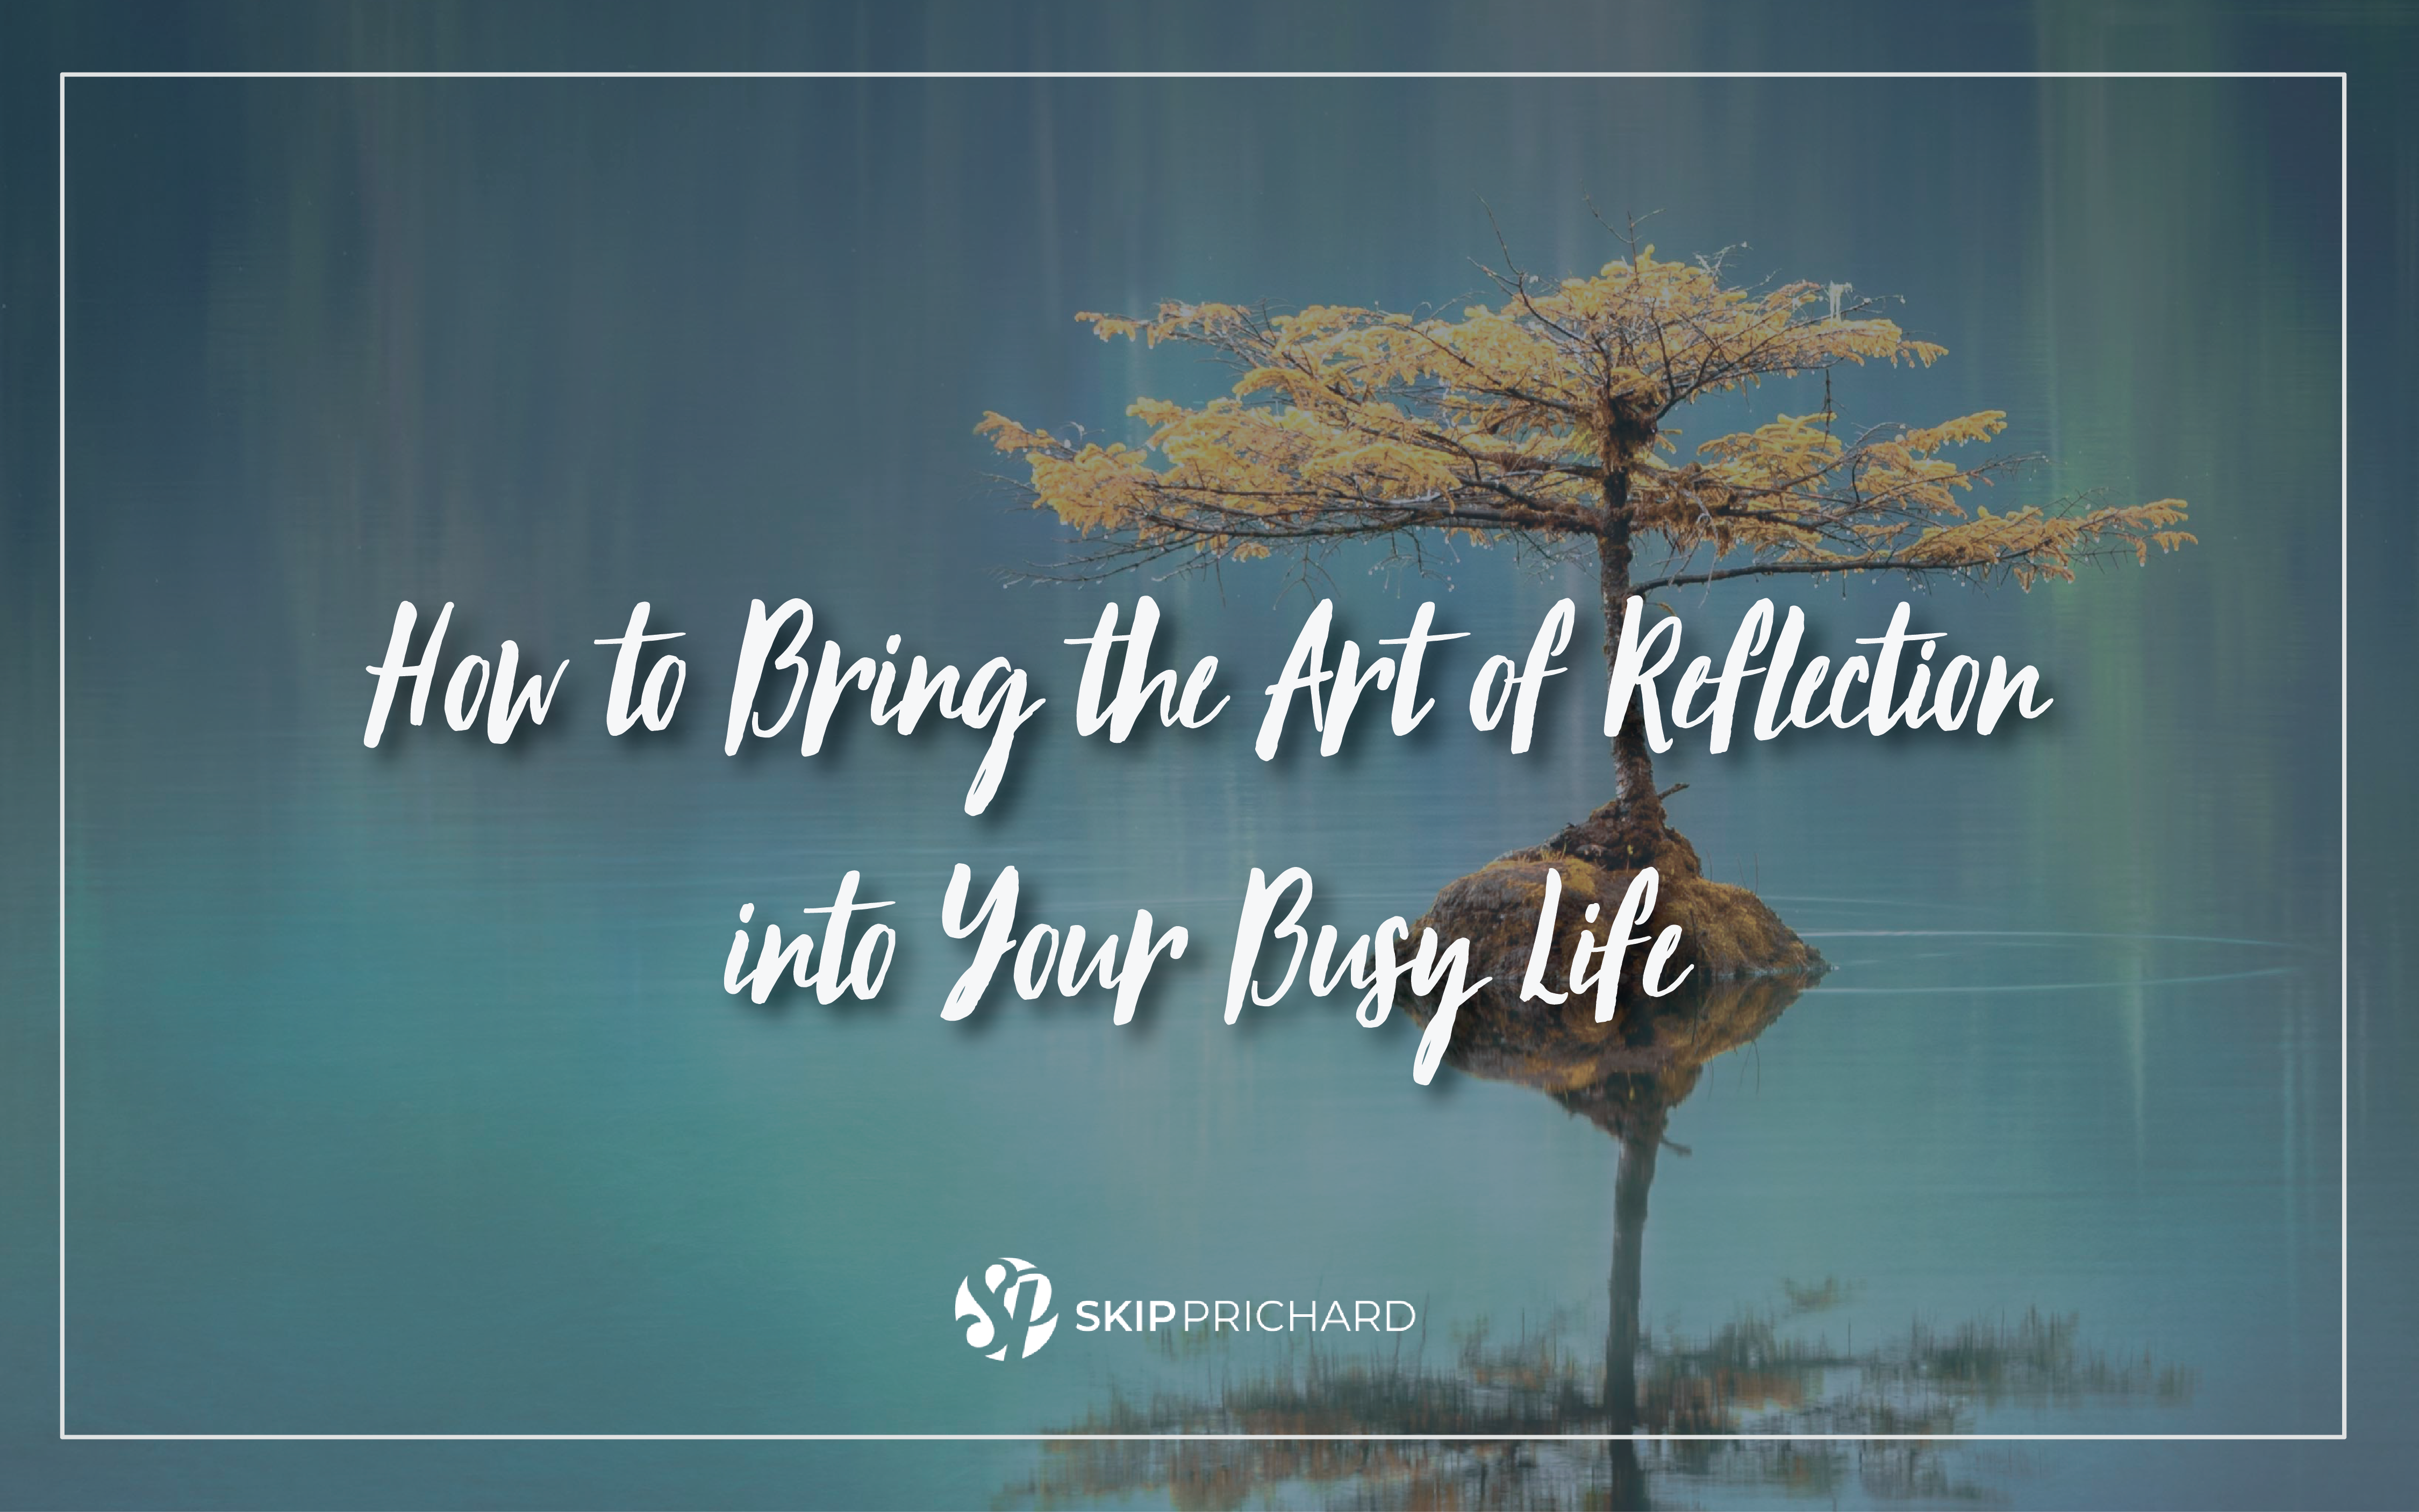 How to Bring the Art of Reflection into Your Busy Life